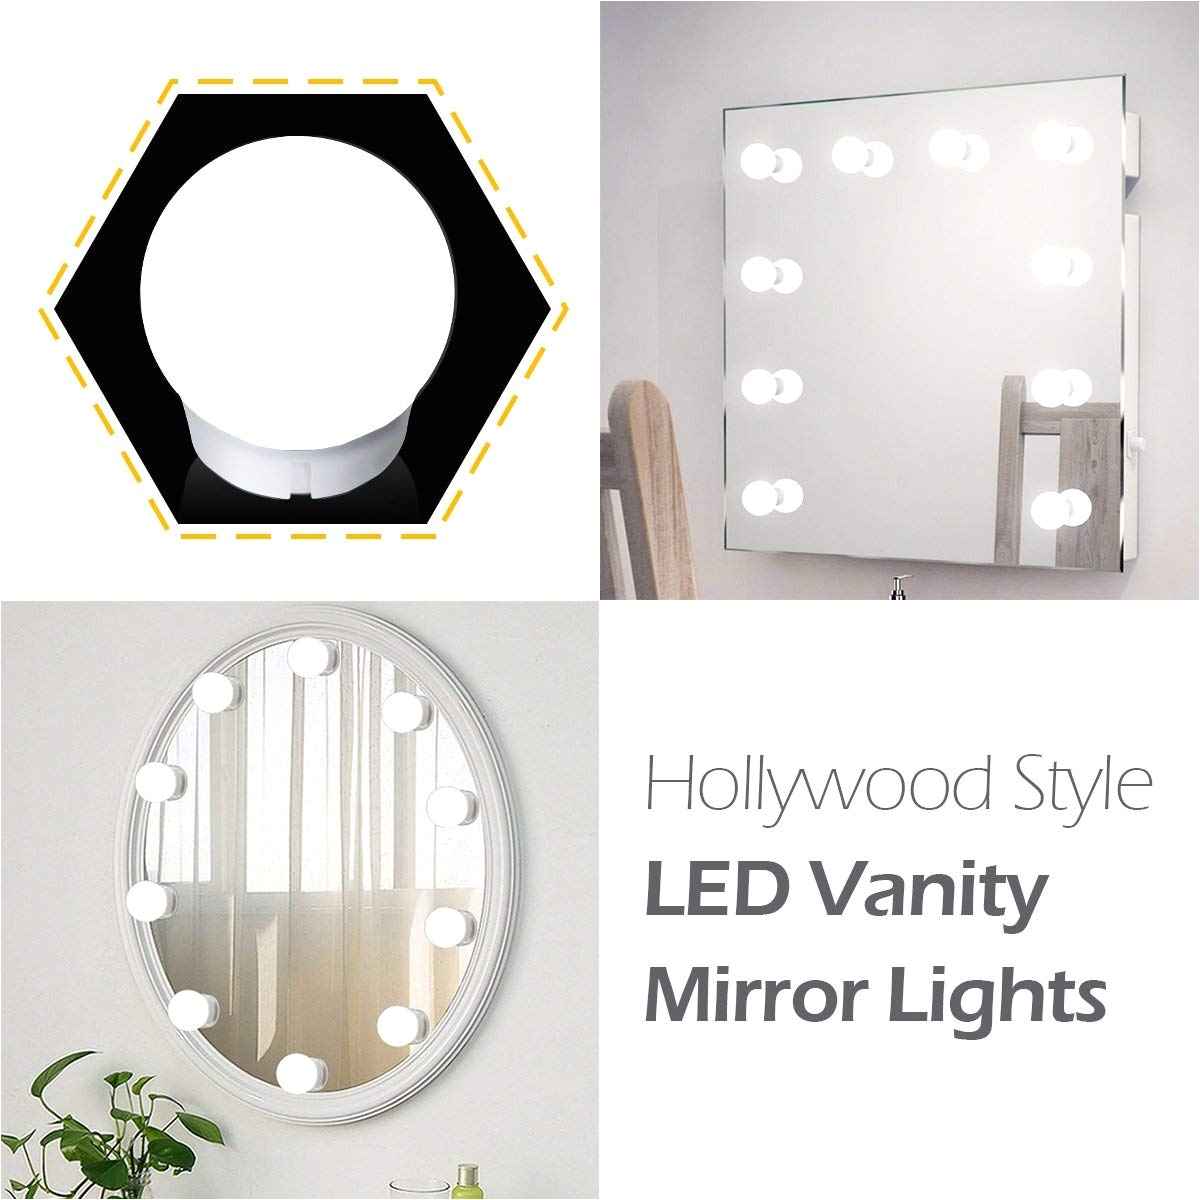 linkable makeup mirror light bulb hollywood style led vanity mirror lights with 1 dimmable bulb for dressing cosmetic bathroom mirror not included